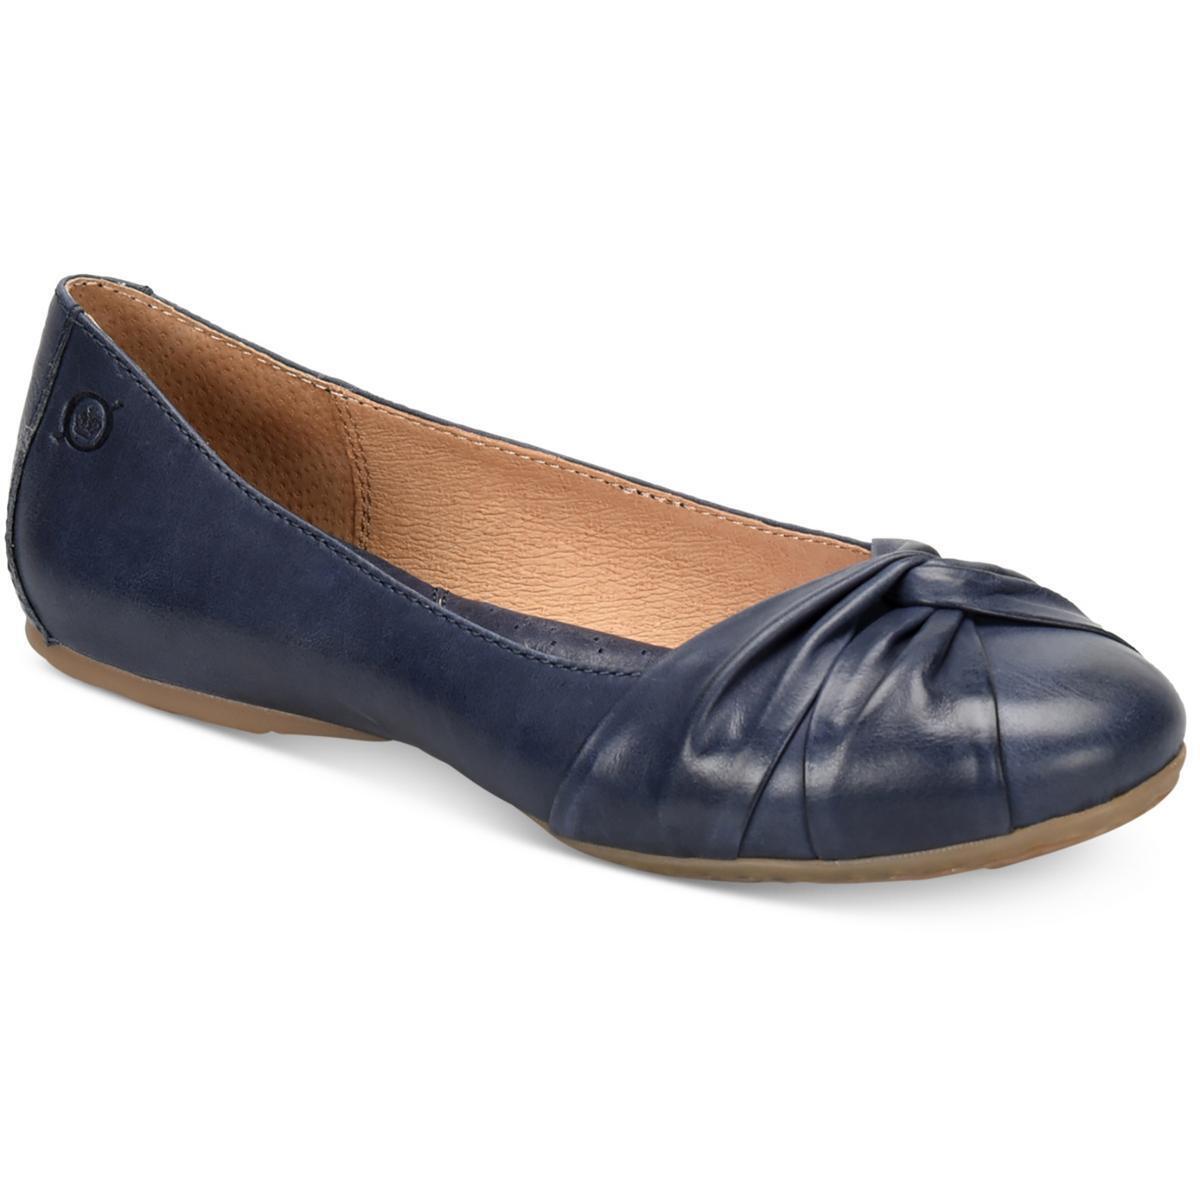 Born Womens Lilly Leather Slip On Knot-Front Loafers Shoes BHFO 8325